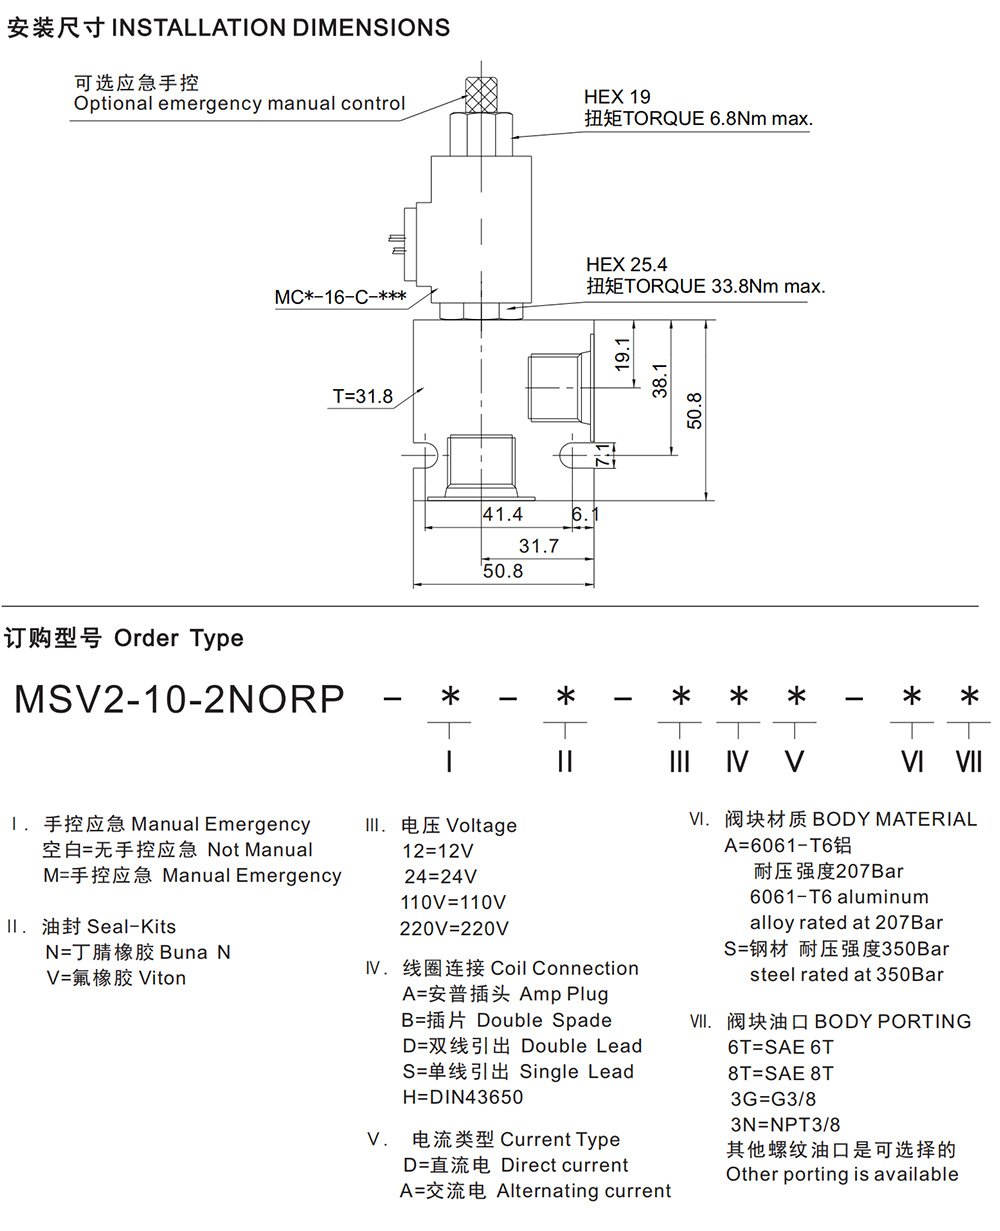 MSV2-10-2NORP